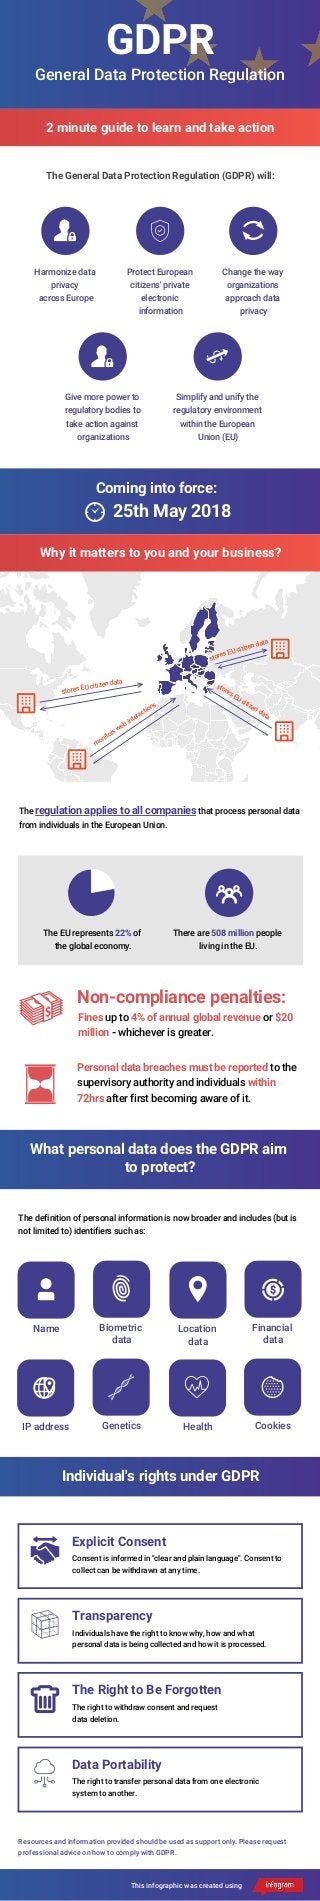 The definition of personal information is now broader and includes (but is
not limited to) identifiers such as:
Individual's rights under GDPR
Fines up to 4% of annual global revenue or $20
million - whichever is greater.
General Data Protection Regulation
GDPR
The General Data Protection Regulation (GDPR) will:
2 minute guide to learn and take action
Coming into force:
25th May 2018
The regulation applies to all companies that process personal data
from individuals in the European Union.
The EU represents 22% of
the global economy.
There are 508 million people
living in the EU.
Non-compliance penalties:
Personal data breaches must be reported to the
supervisory authority and individuals within
72hrs after first becoming aware of it.
stores EU citizen data
Protect European
citizens' private
electronic
information
Name
stores EU citizen data
monitors web interactions
stores EU citizen data
Explicit Consent
Consent is informed in "clear and plain language". Consent to
collect can be withdrawn at any time.
Resources and information provided should be used as support only. Please request
professional advice on how to comply with GDPR.
This infographic was created using
Change the way
organizations
approach data
privacy
Harmonize data
privacy
across Europe
Give more power to
regulatory bodies to
take action against
organizations
Simplify and unify the
regulatory environment
within the European
Union (EU)
Why it matters to you and your business?
What personal data does the GDPR aim
to protect?
Biometric
data
Location
data
Financial
data
IP address Genetics Health Cookies
Transparency
Individuals have the right to know why, how and what
personal data is being collected and how it is processed.
The Right to Be Forgotten
The right to withdraw consent and request
data deletion.
Data Portability
The right to transfer personal data from one electronic
system to another.
 